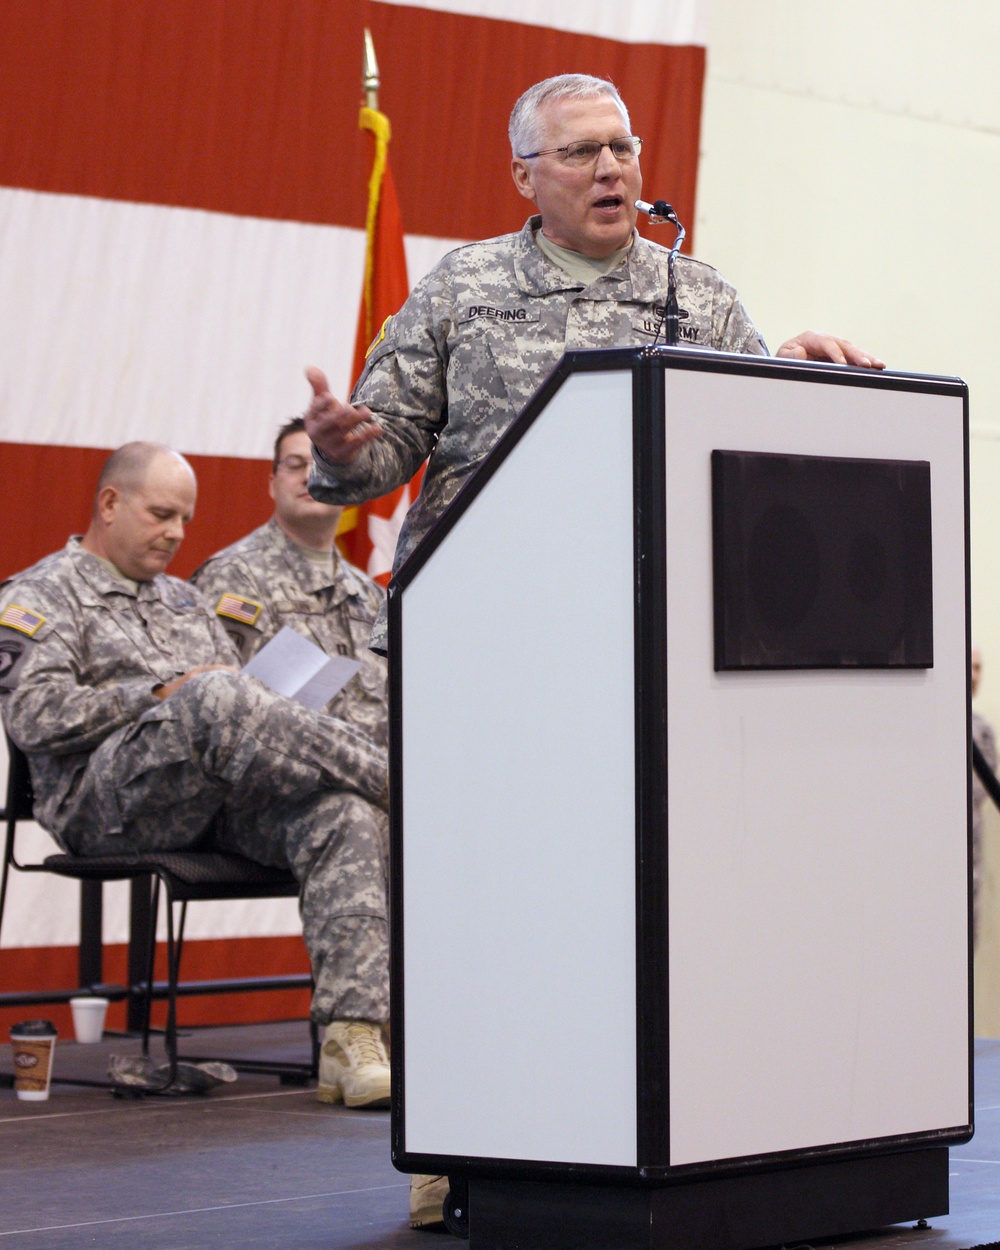 45th Infantry Brigade Combat Team soldiers return to Oklahoma